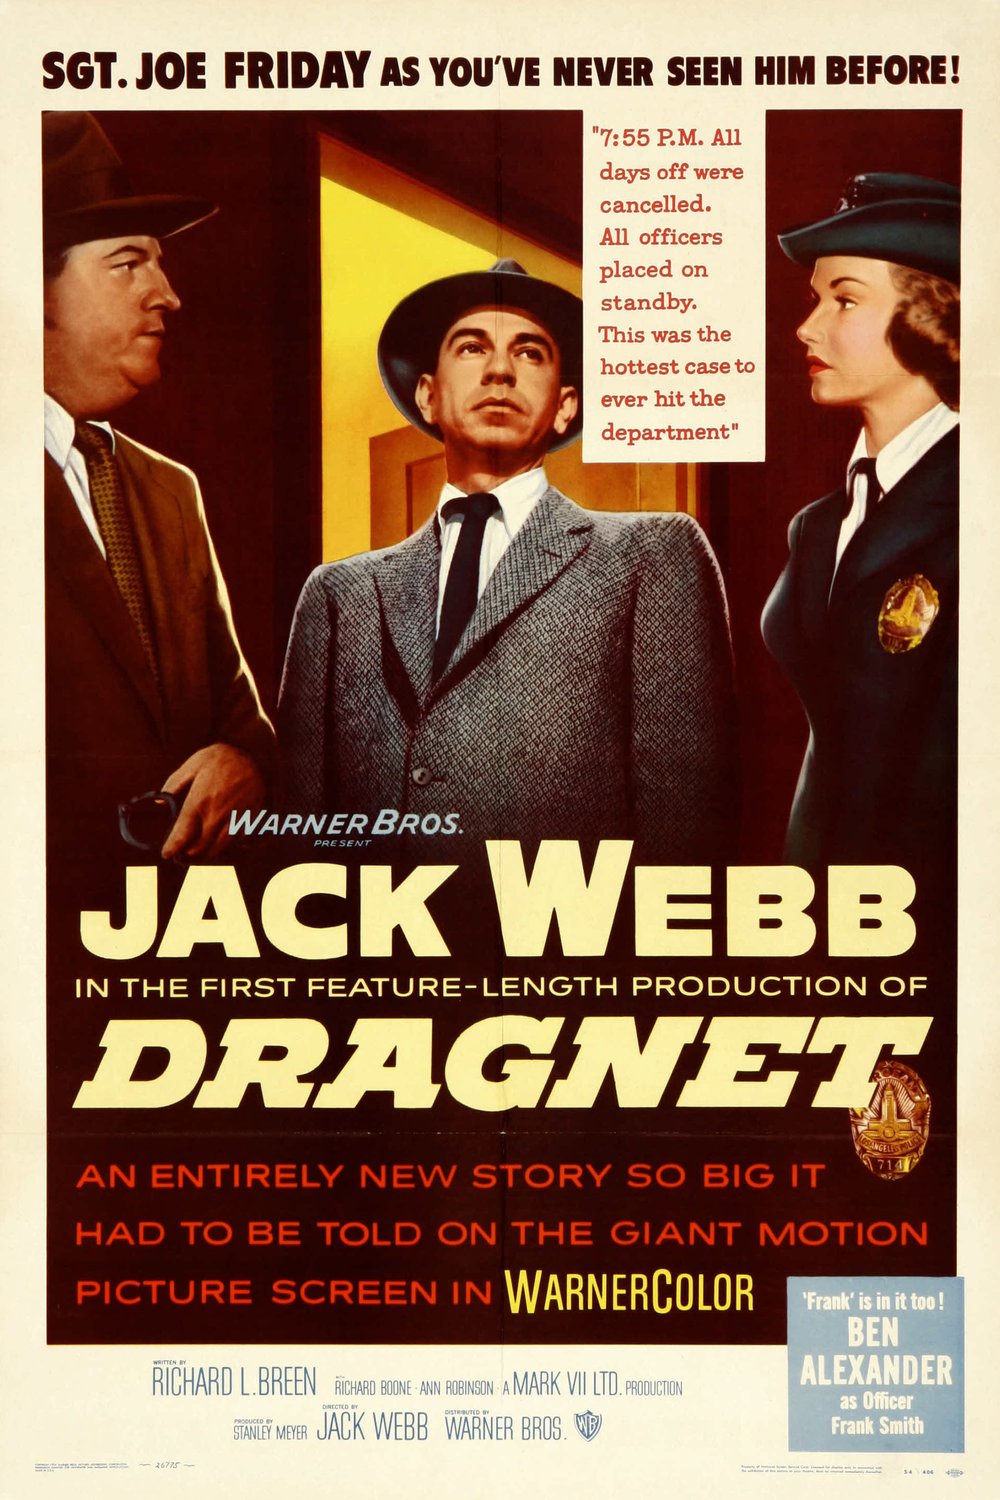 Poster of the movie Dragnet